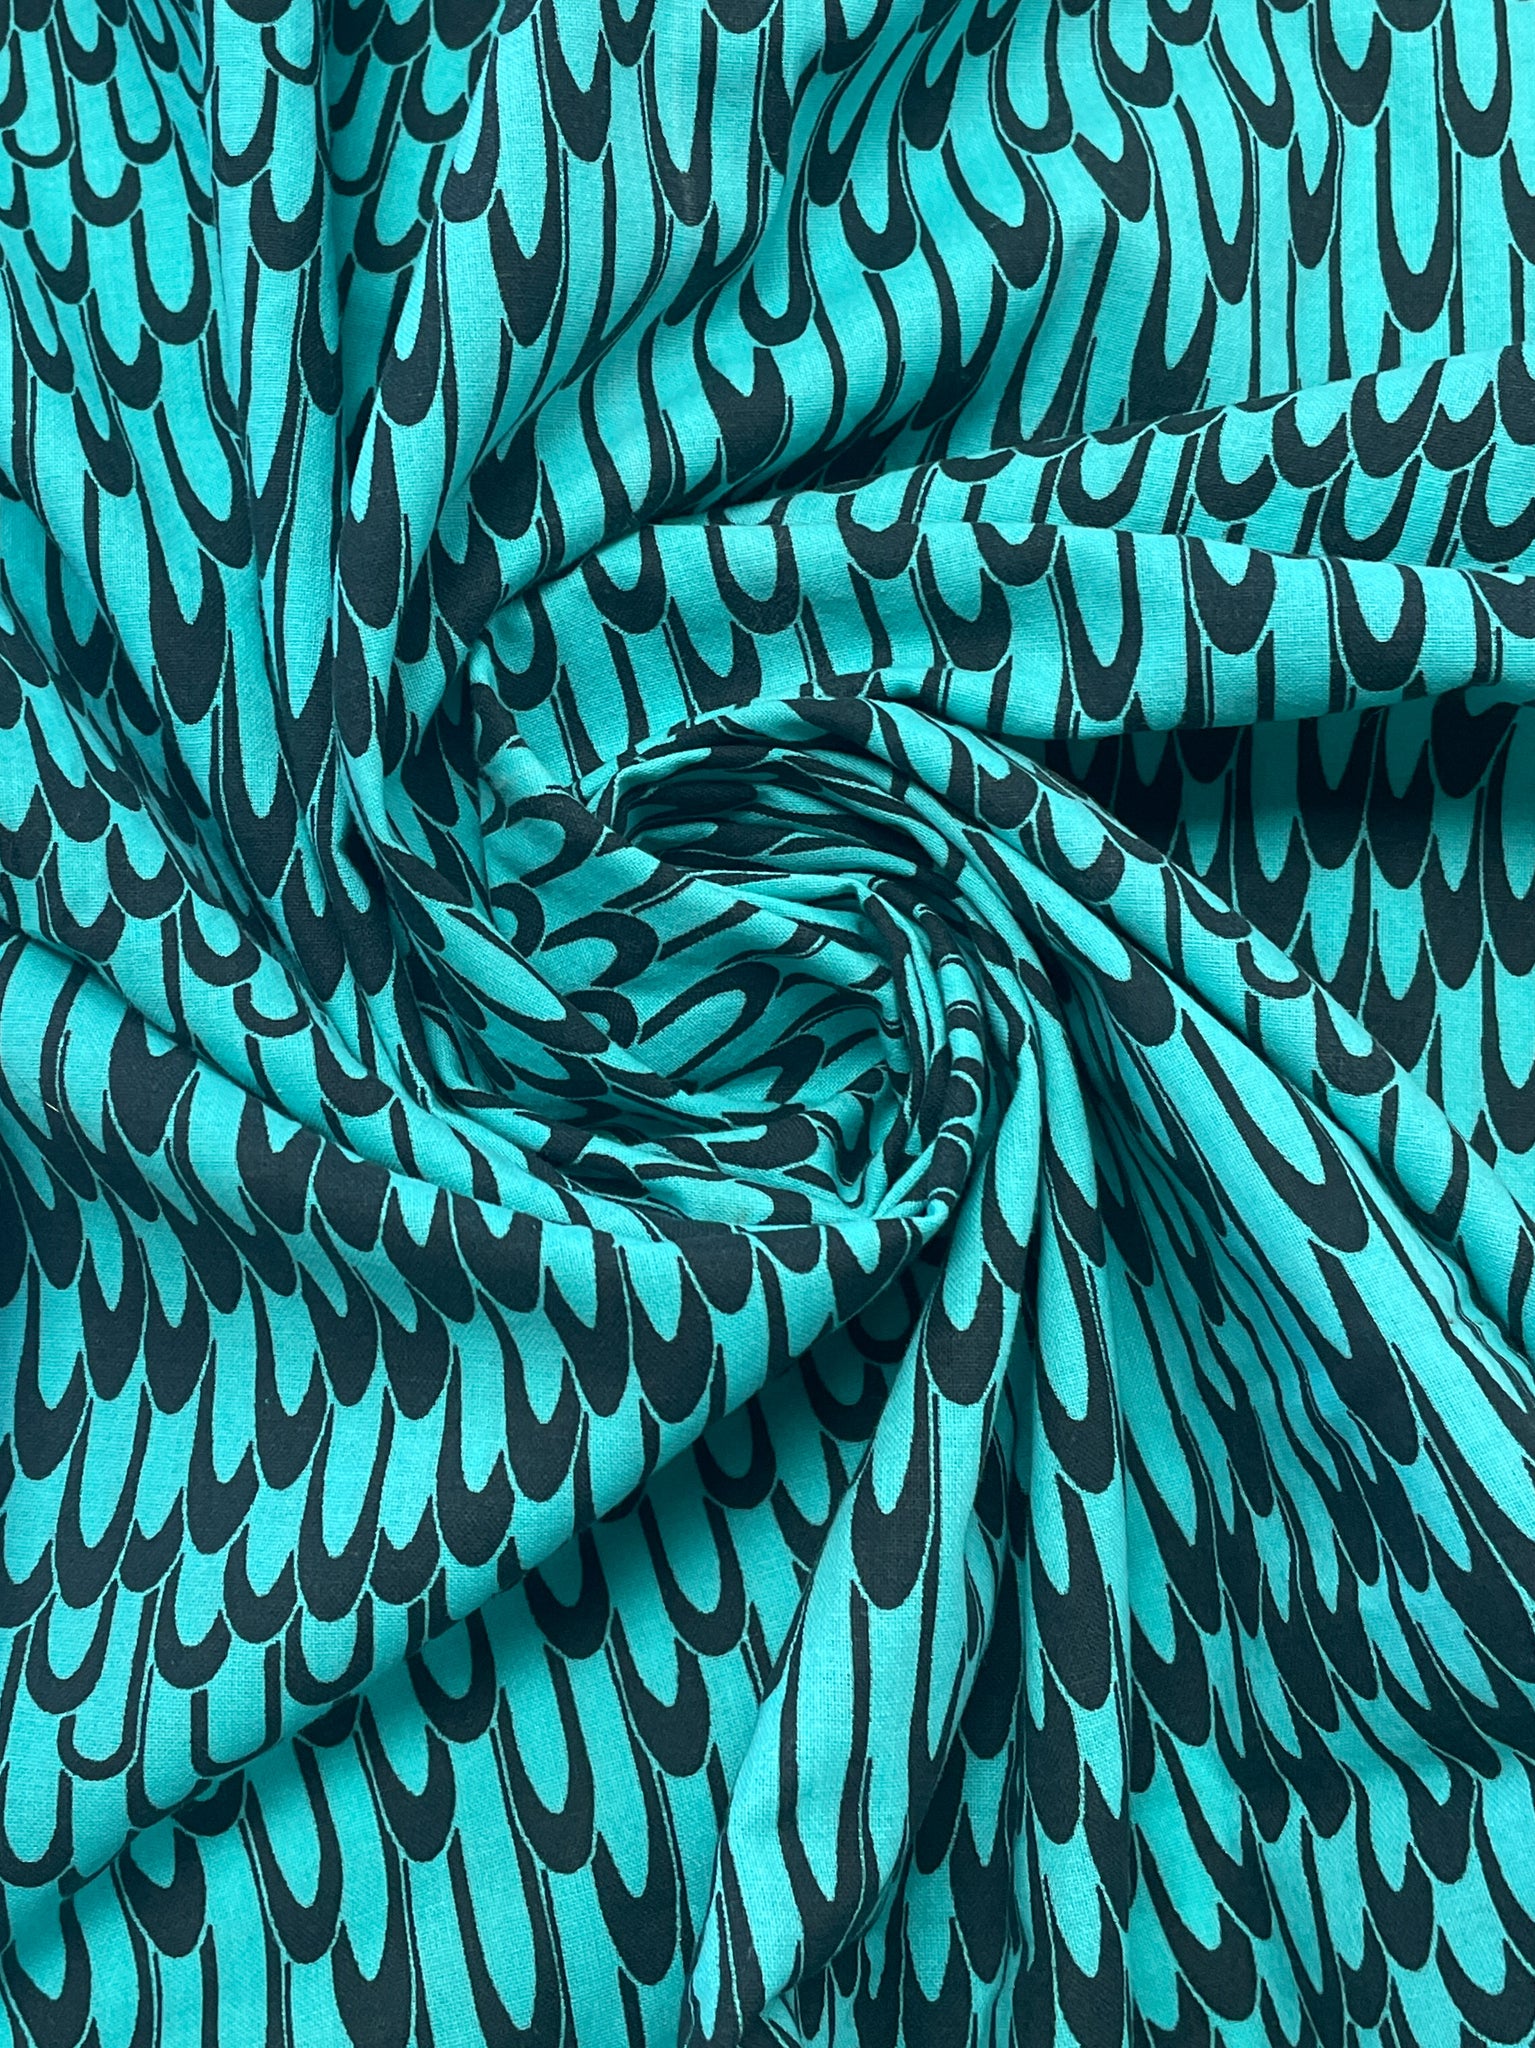 1 YD Quilting Cotton - Turquoise with Black